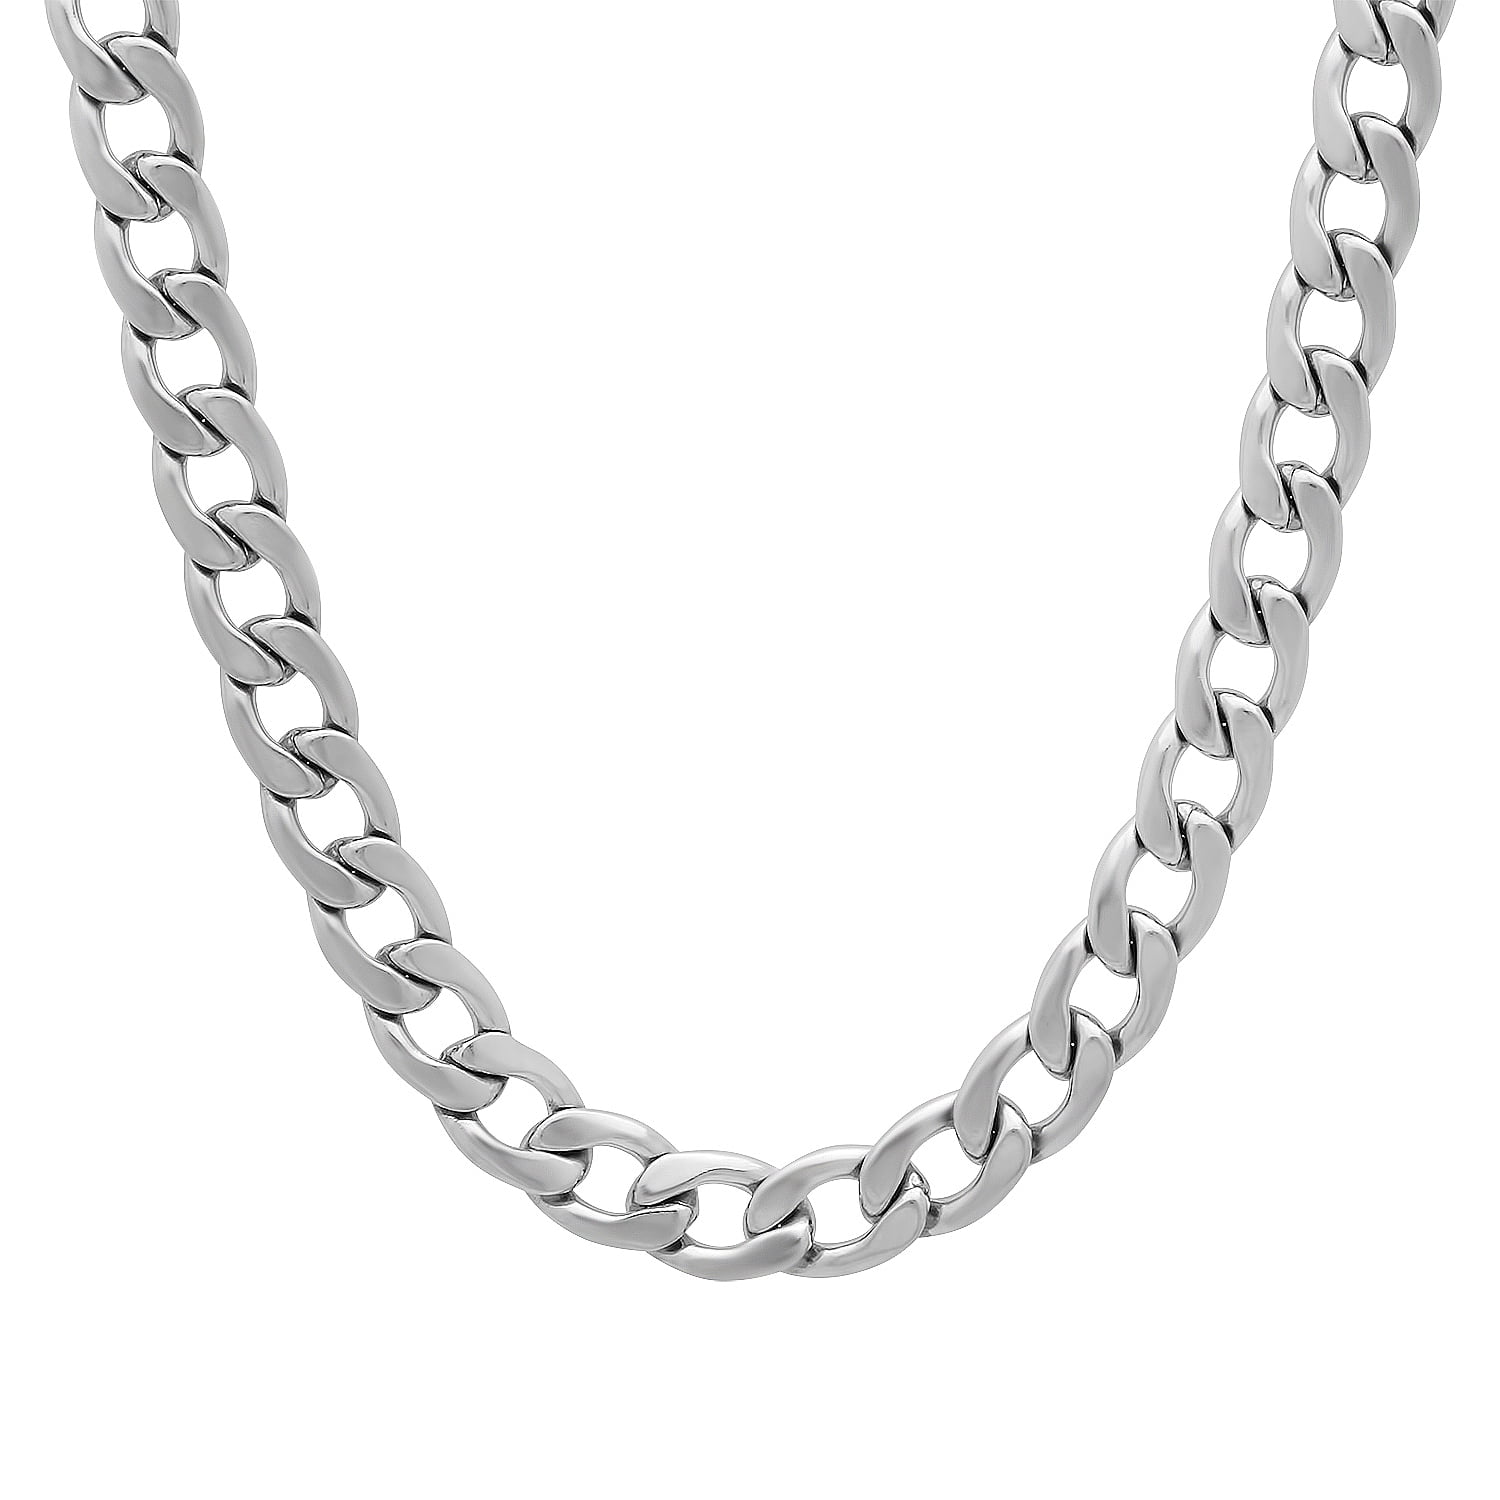 Stainless Steel 3mm Curb Chain Best Quality Free Gift Box